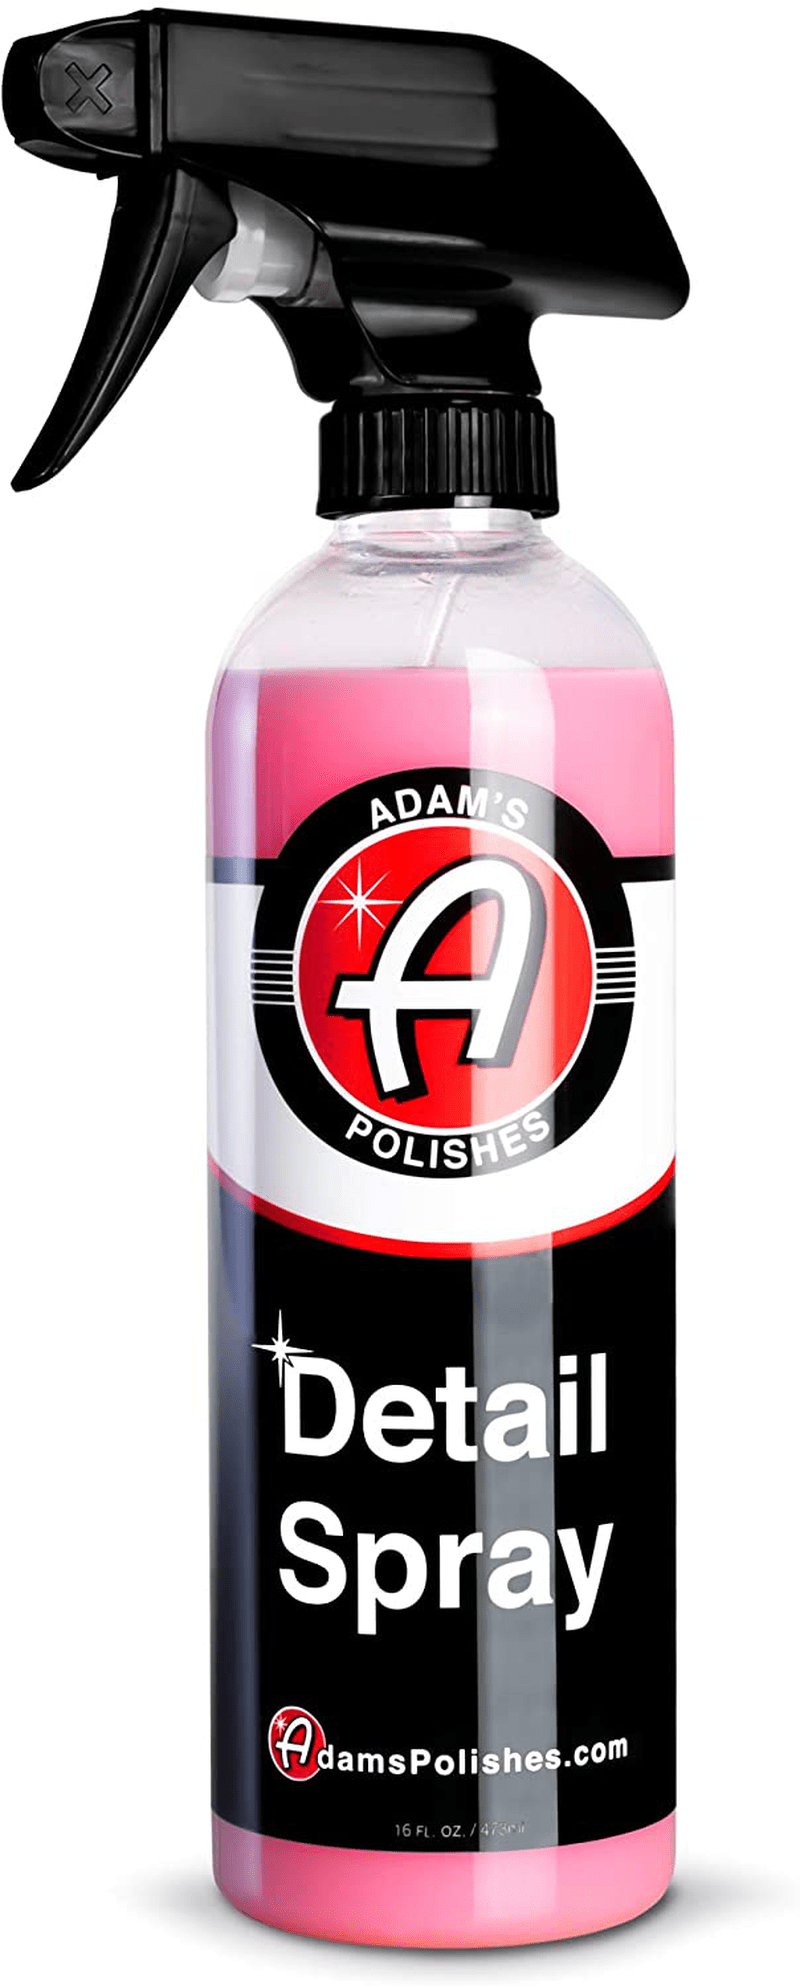 Adam's Detail Spray 16oz - Quick Waterless Detailer Spray for Car Detailing | Polisher Clay Bar & Car Wax Boosting Tech | Add Shine Gloss Depth Paint | Car Wash Kit & Dust Remover Vehicles & Parts > Vehicle Parts & Accessories > Vehicle Maintenance, Care & Decor > Vehicle Paint Adam's Polishes 16 fl. oz  